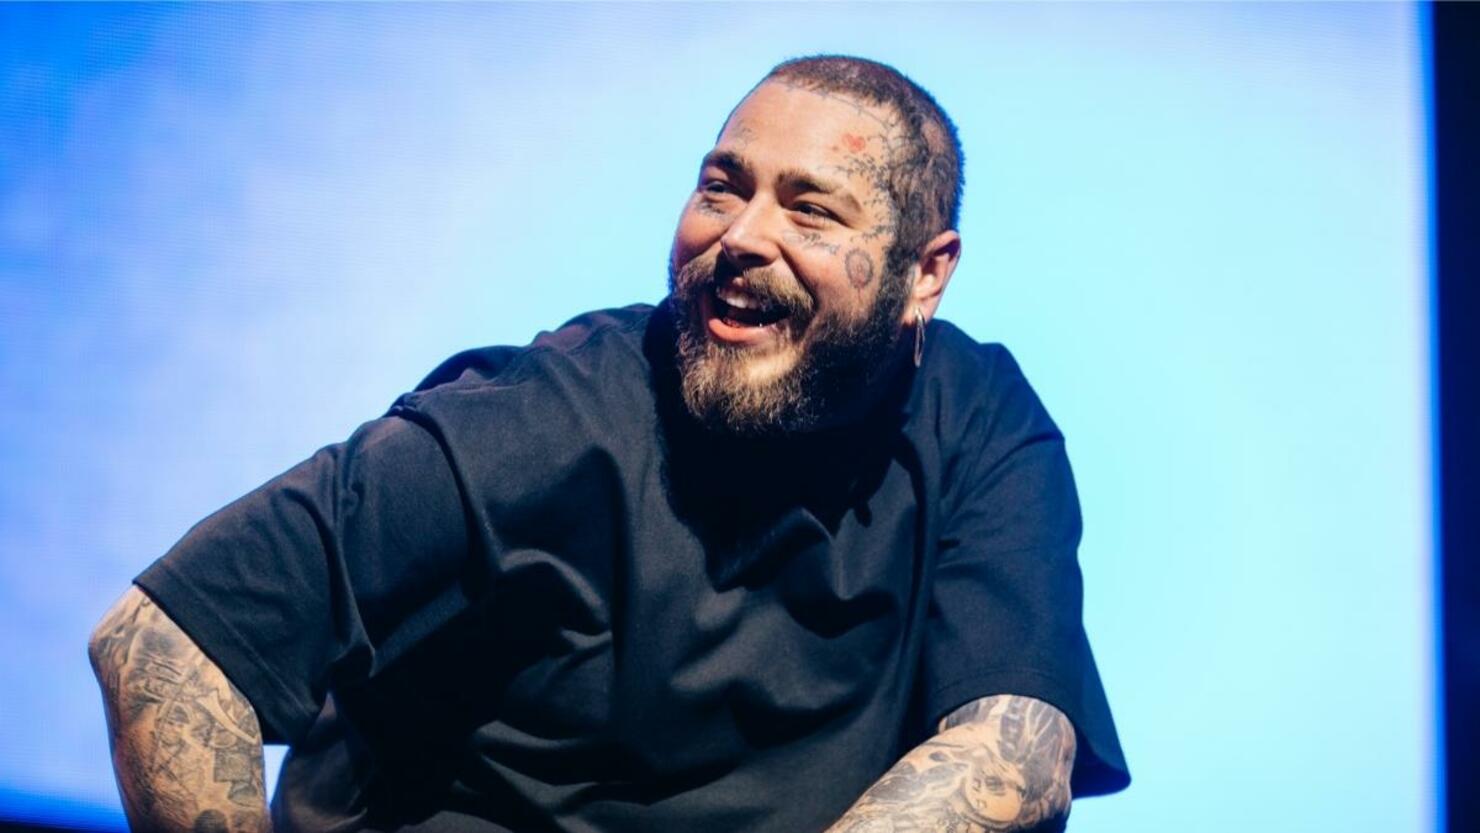 Post Malone Gets Daughter's Initials Tattooed On Face